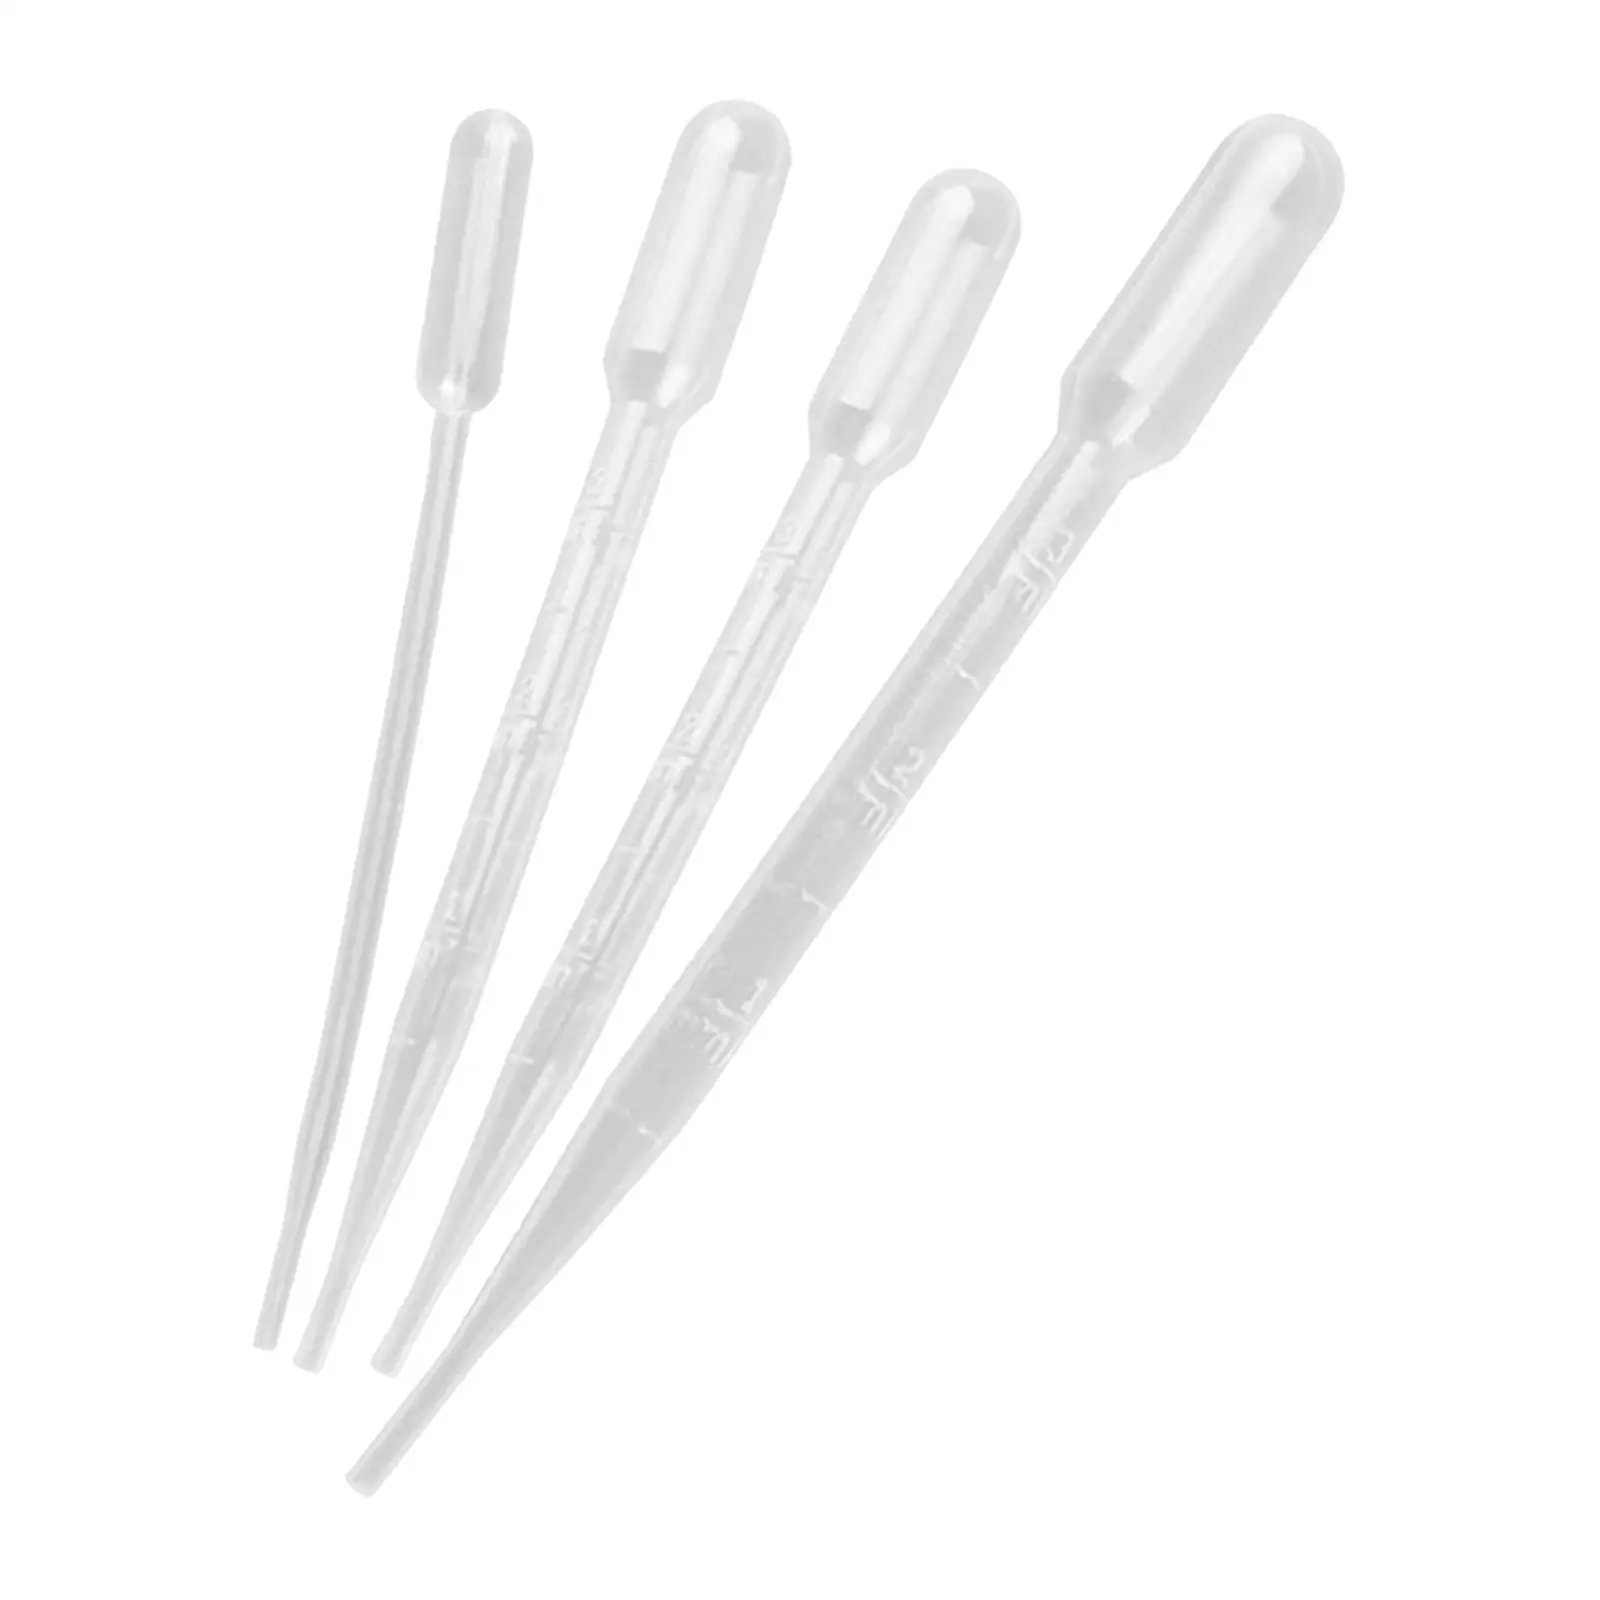 4x Transfer Graduated Pipettes Modeling Painting Tool Clear Liquid Dropper Dropper Set for Hobby Building Tools Toys Coloring